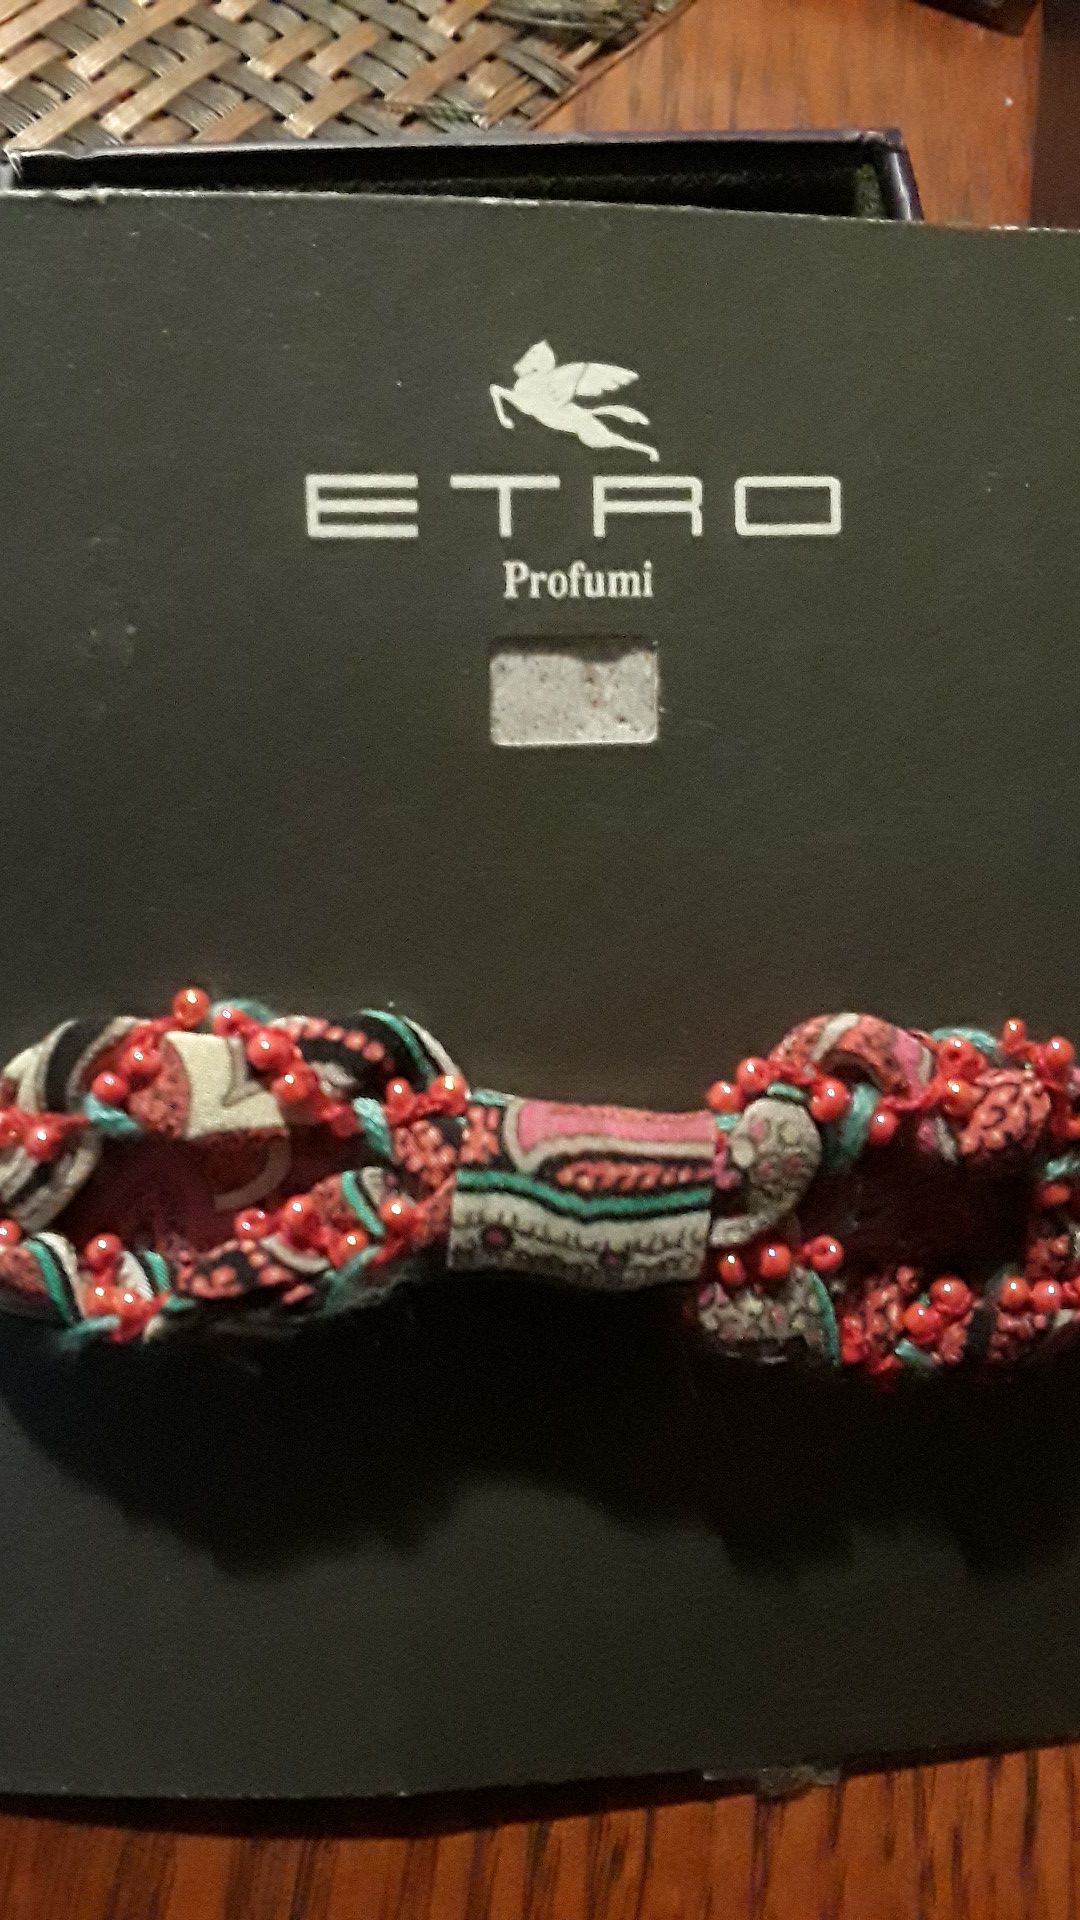 Absolutely Gorgeous Italian Designer's ETRO MILANO accessory. Made in Italy.